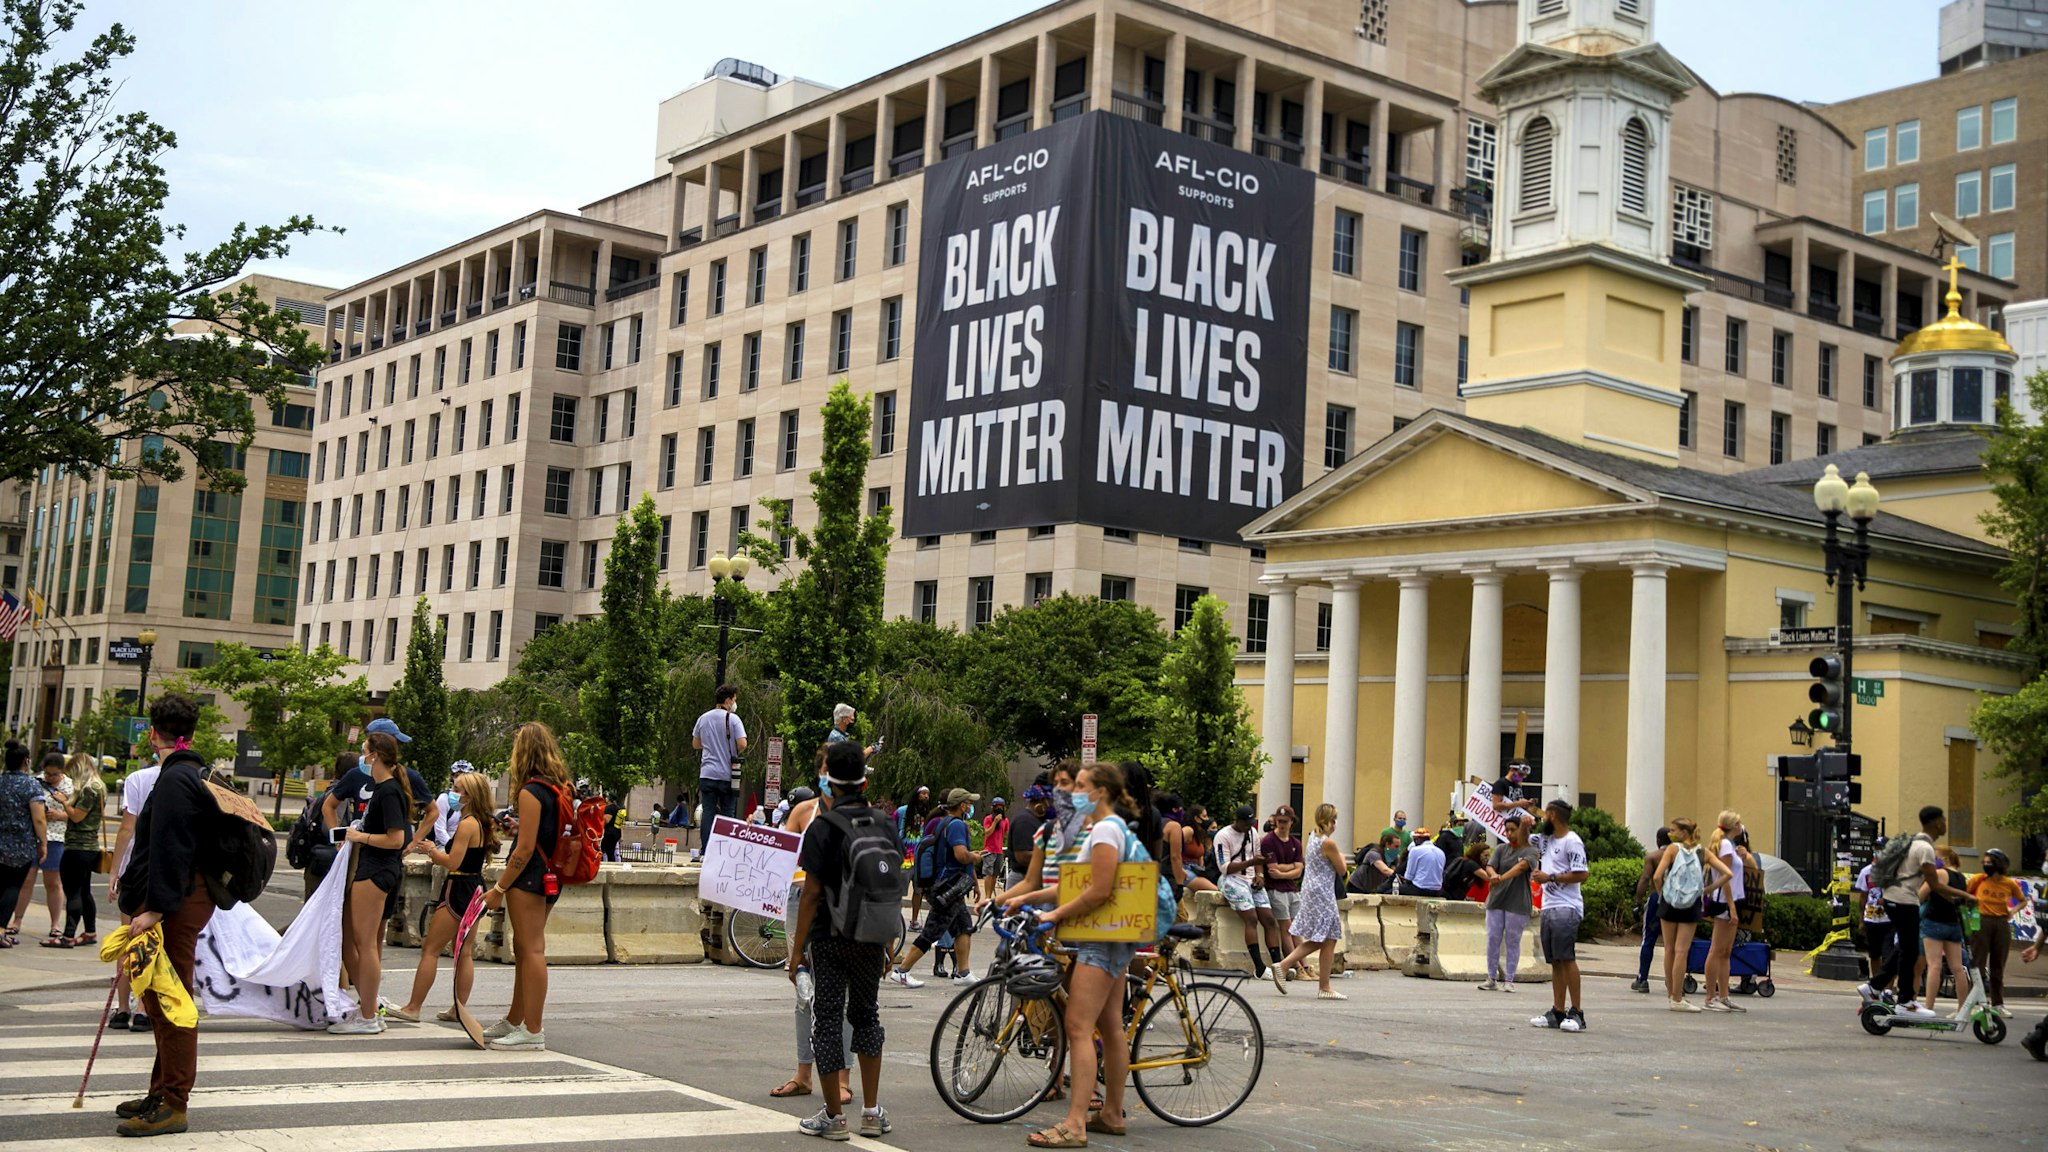 WASHINGTON, DC - JUNE 22: Protesters move items they found to block off police after the police tried to open up H Street to traffic on June 22, 2020 in Washington, DC. Protests continue around the country over the deaths of African Americans while in police custody.